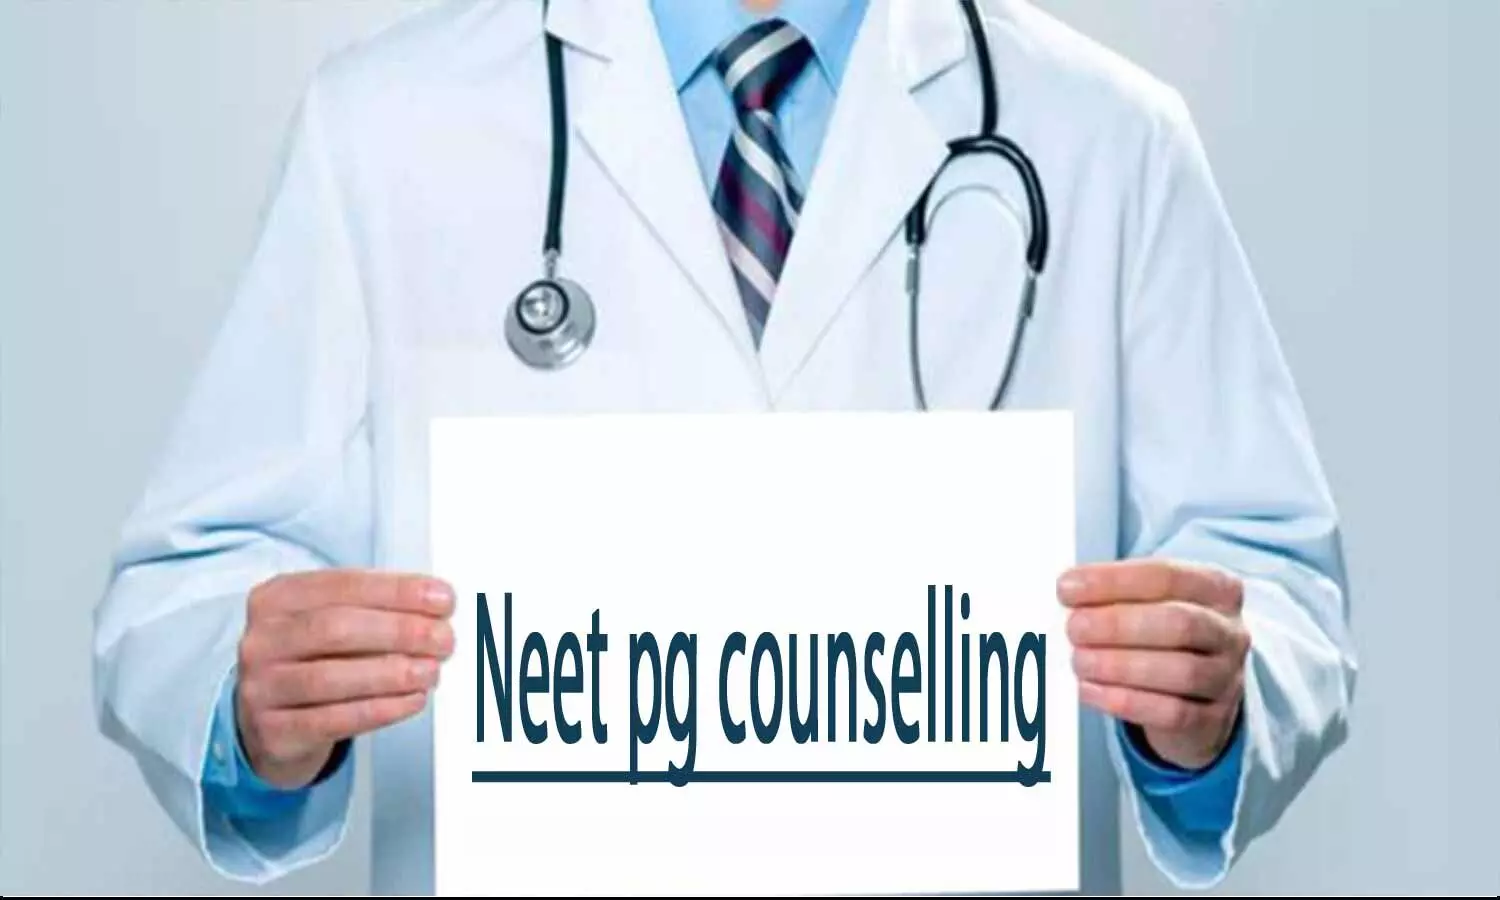 Help Expedite NEET PG Counselling: Doctors tell Chief Justice of India